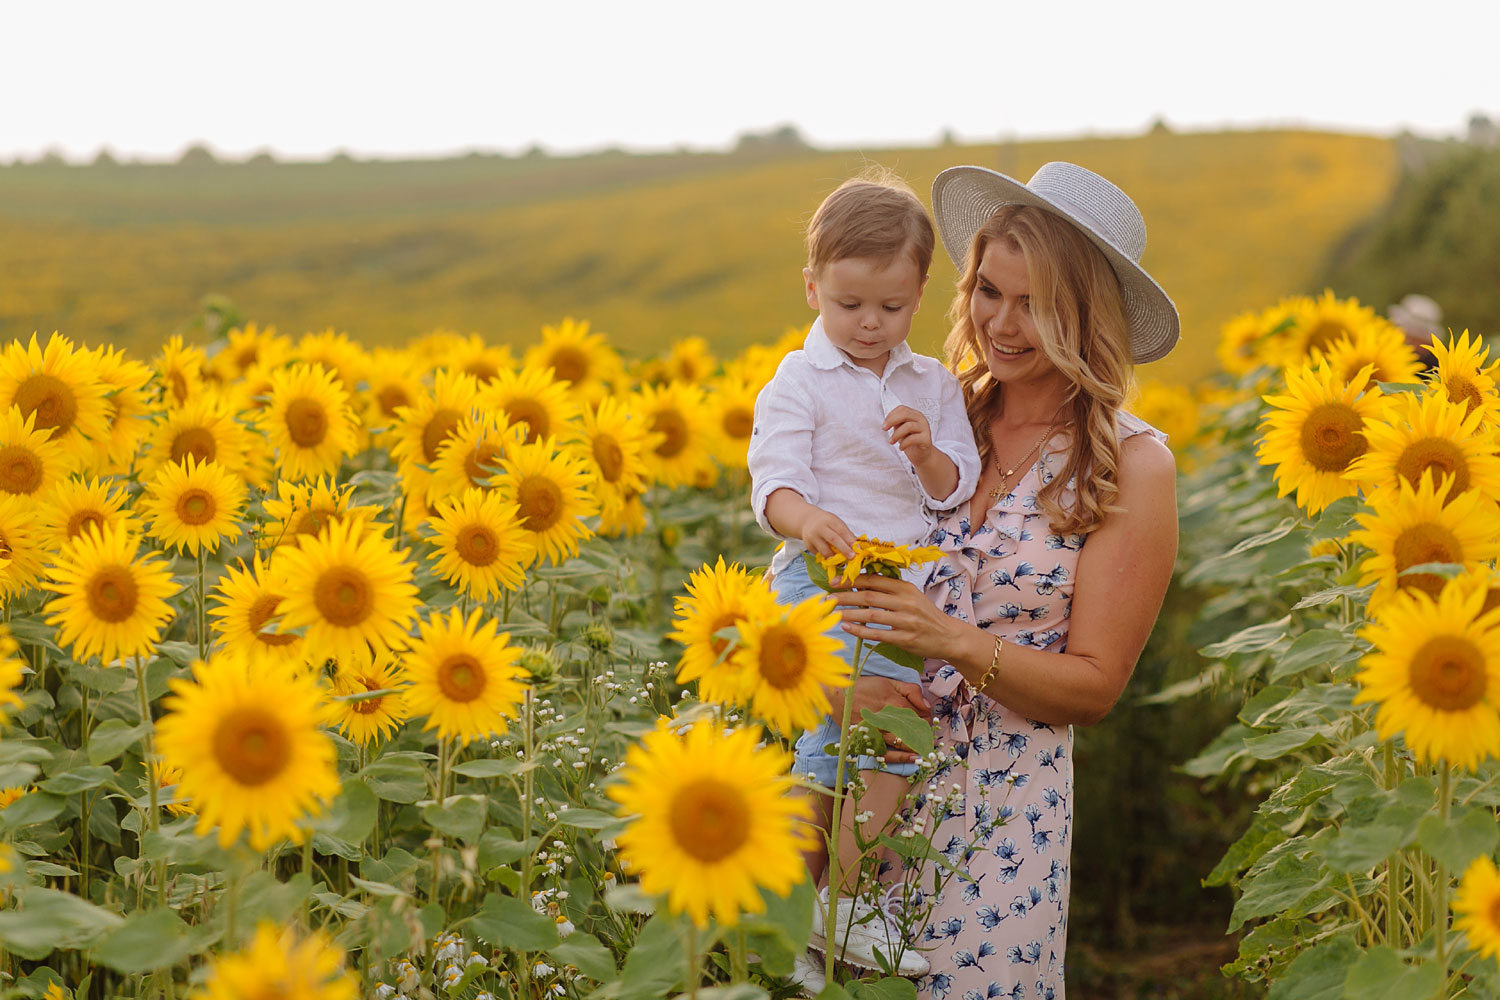 The Annual Buttonwood Farm Sunflower Festival - Kids in Connecticut